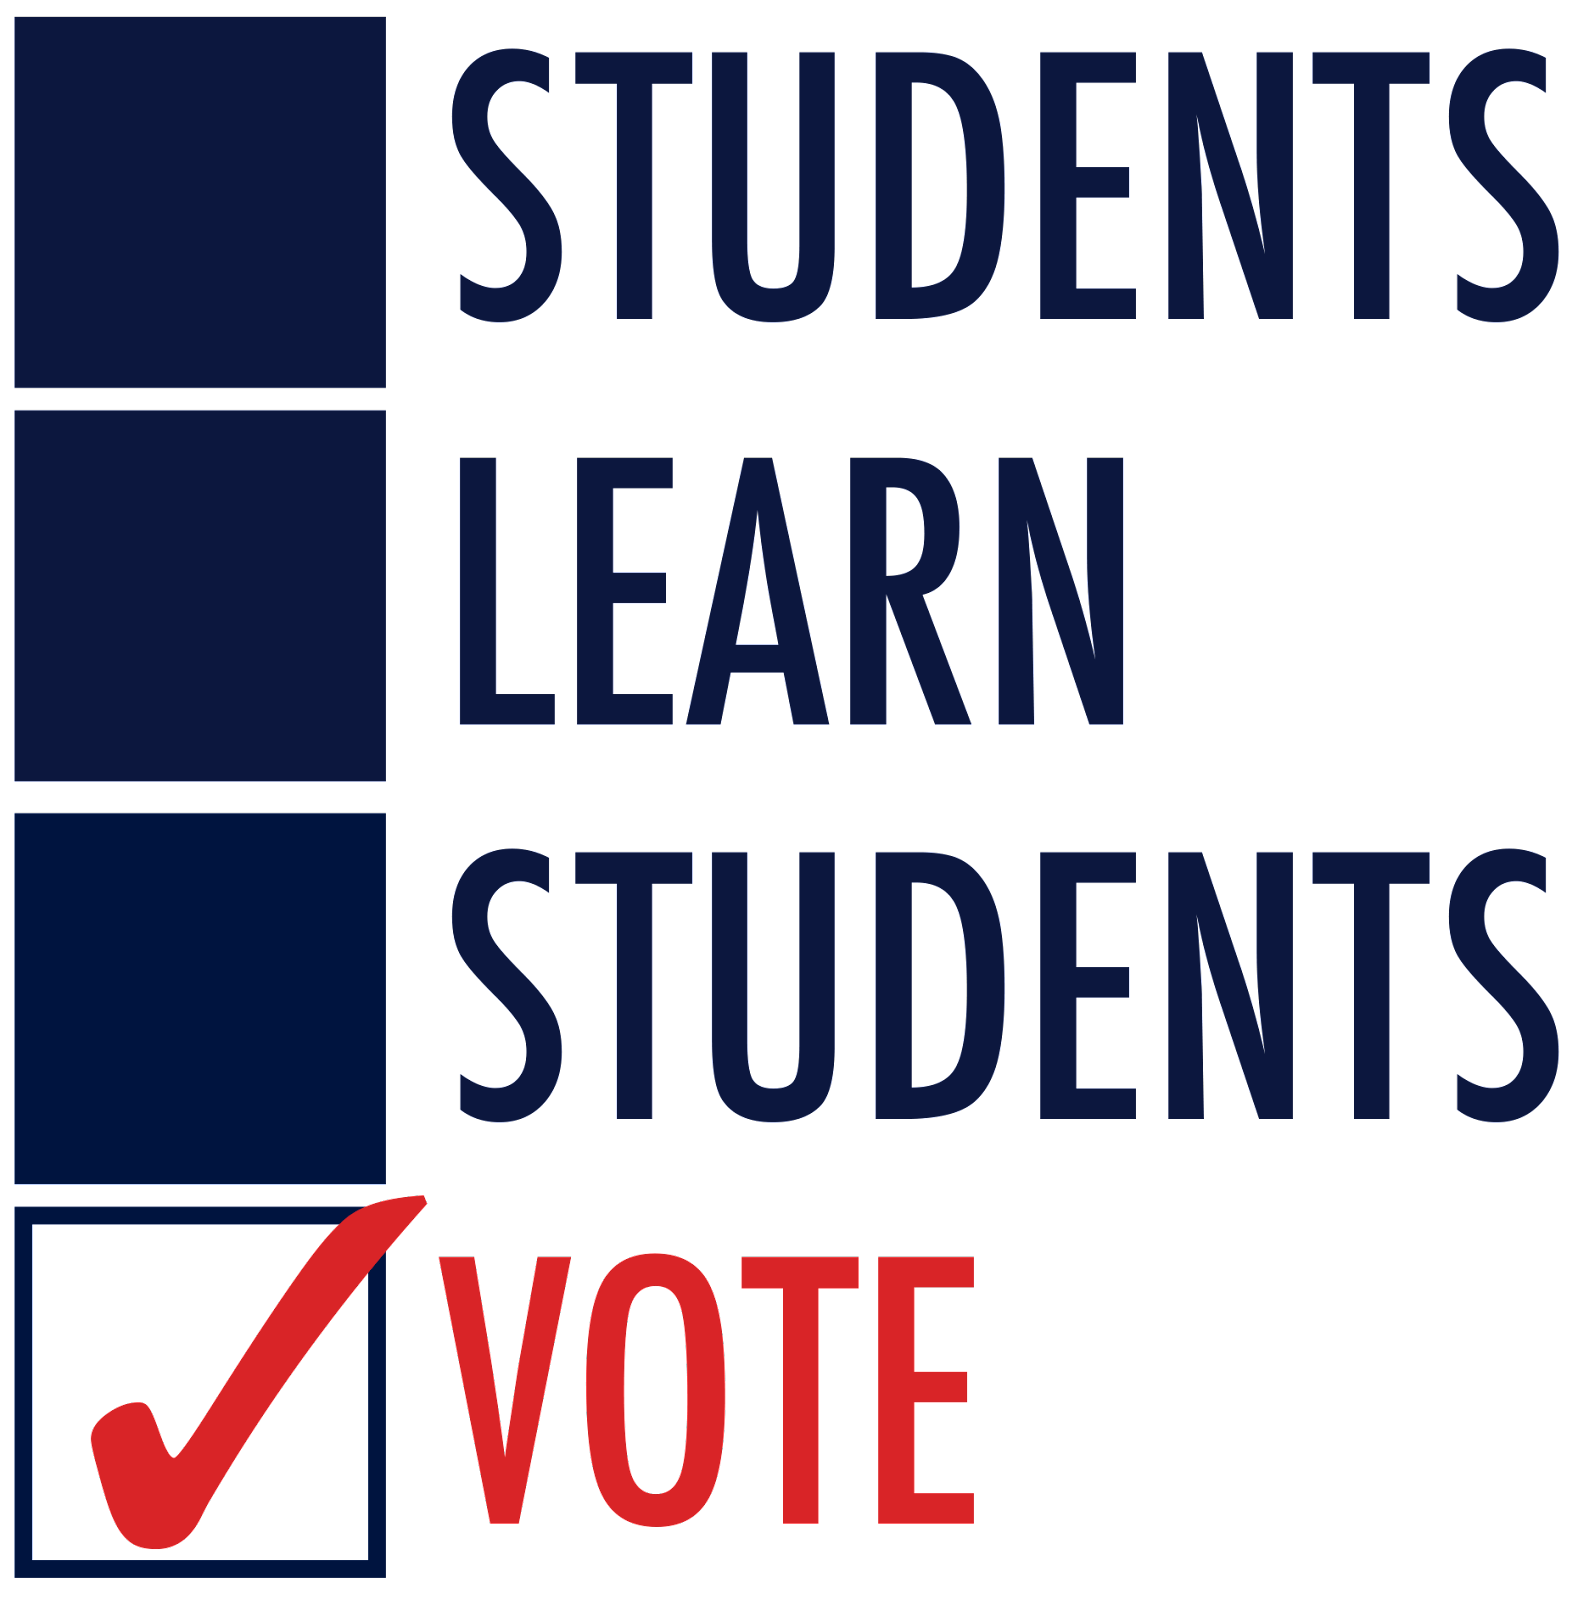 Students Learn Students Vote Coalition